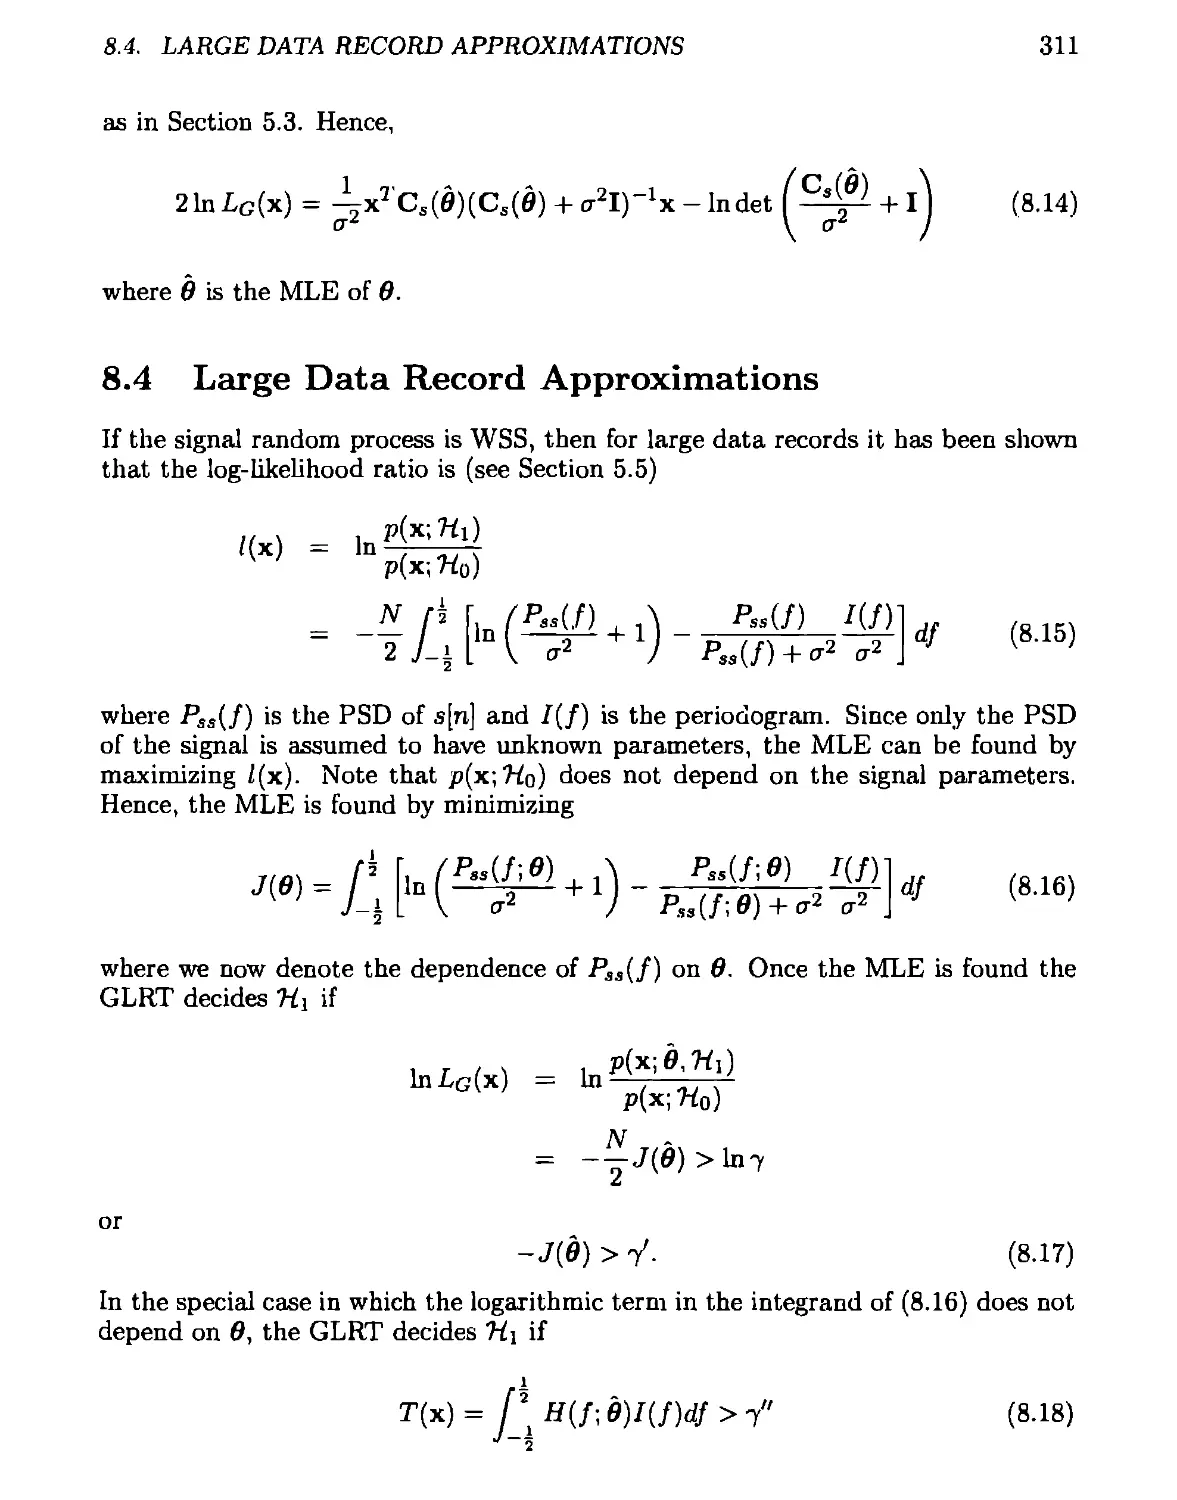 8.4 Large Data Record Approximations